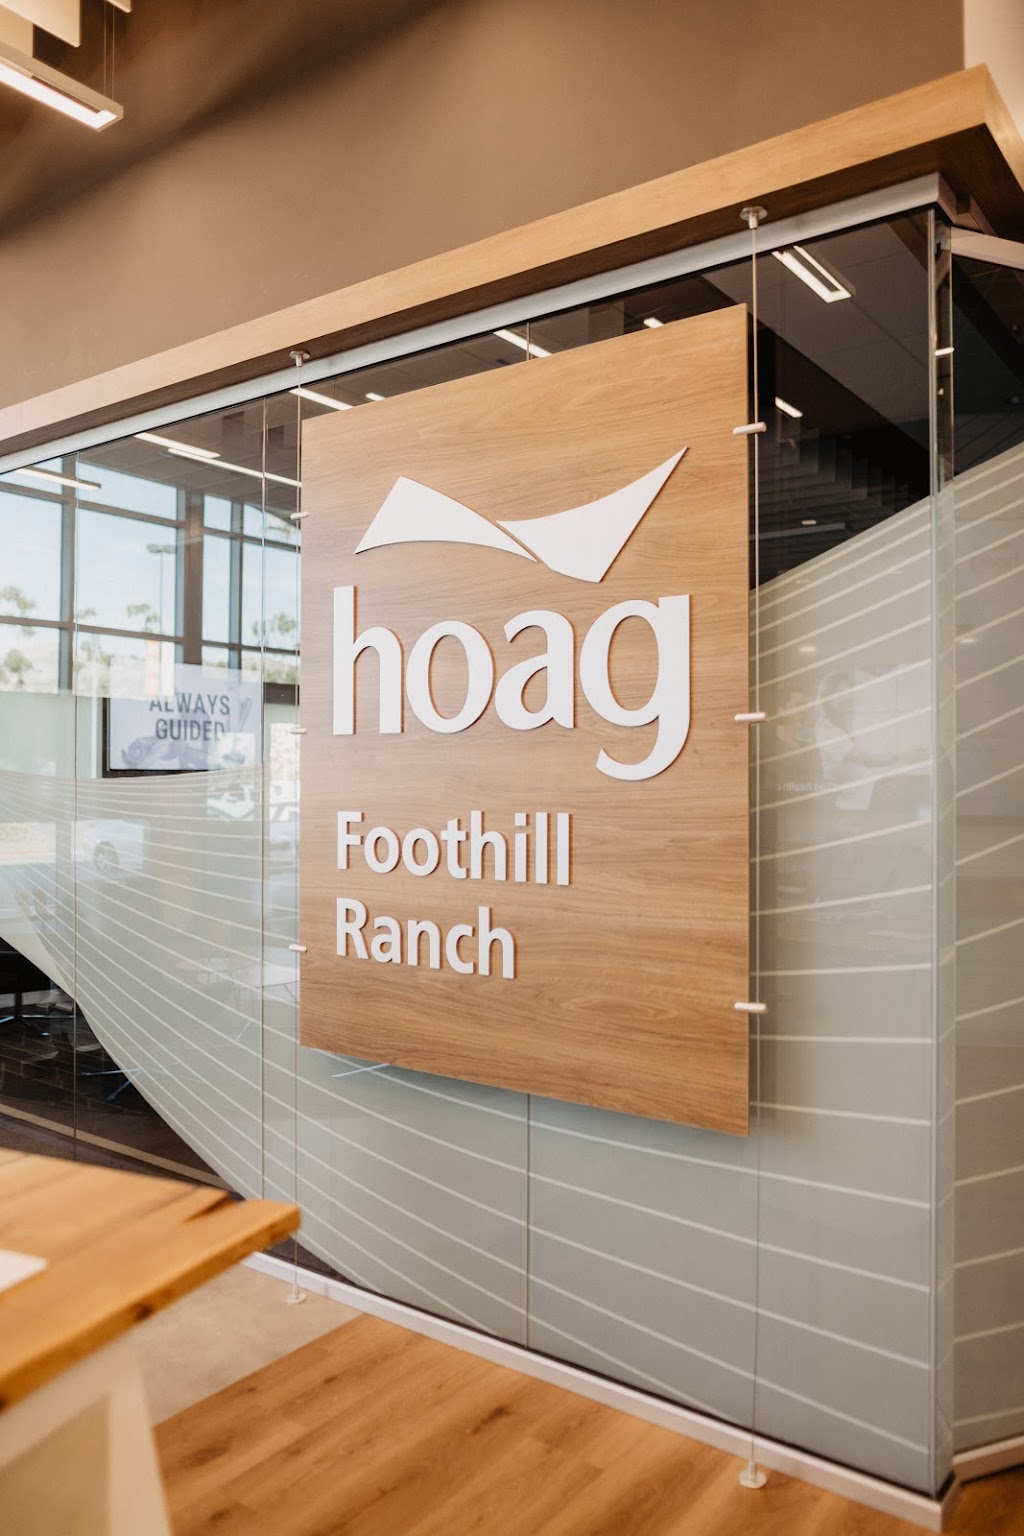 Hoag Health Center - Foothill Ranch | 26672 Portola Pkwy, Foothill Ranch, CA 92610, USA | Phone: (949) 557-0750